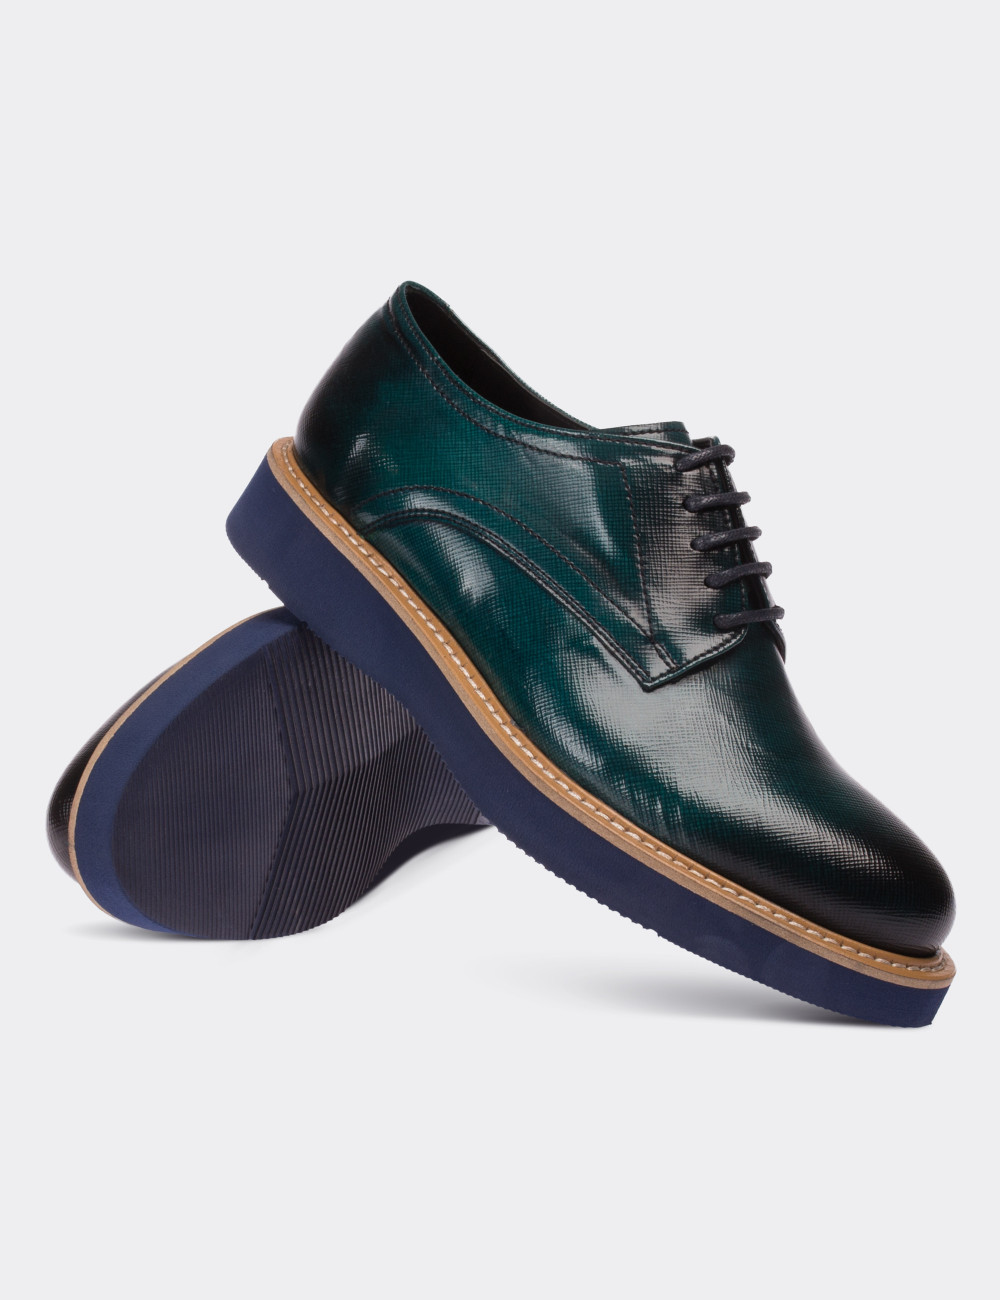 Green Patent Leather Lace-up Shoes - 01430ZYSLE08